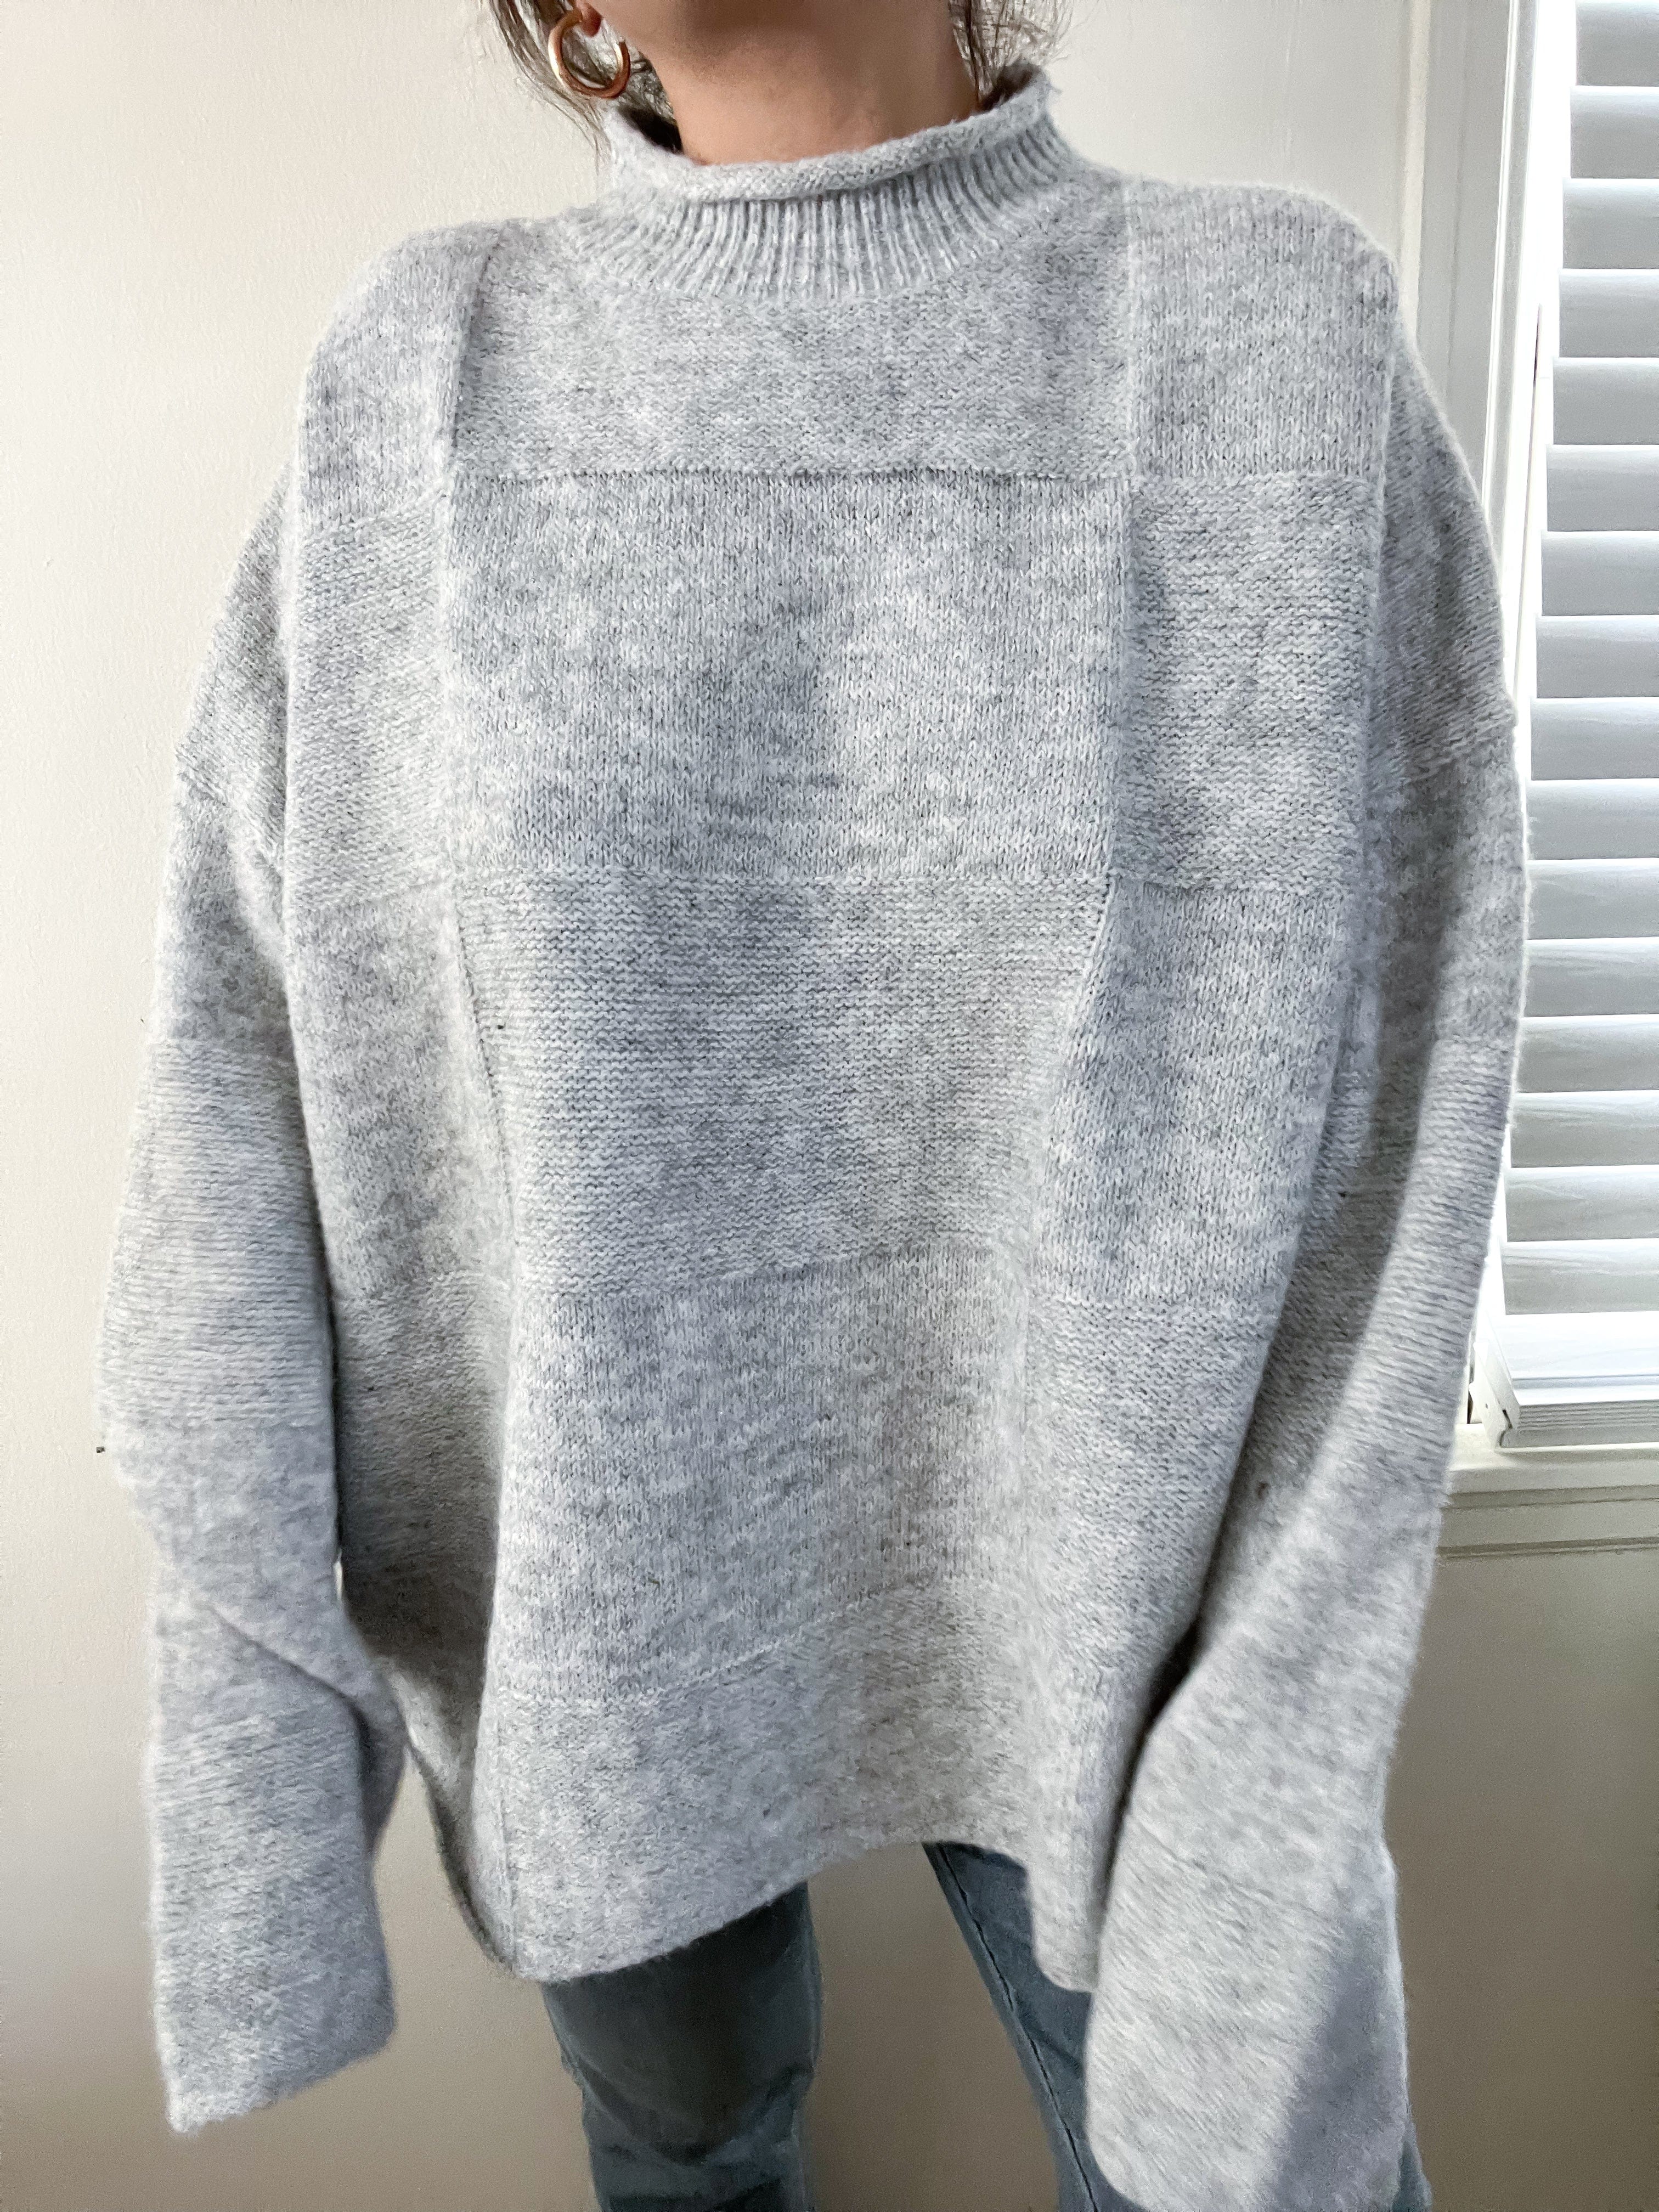 Ryleigh Mock Neck Sweater in Gray